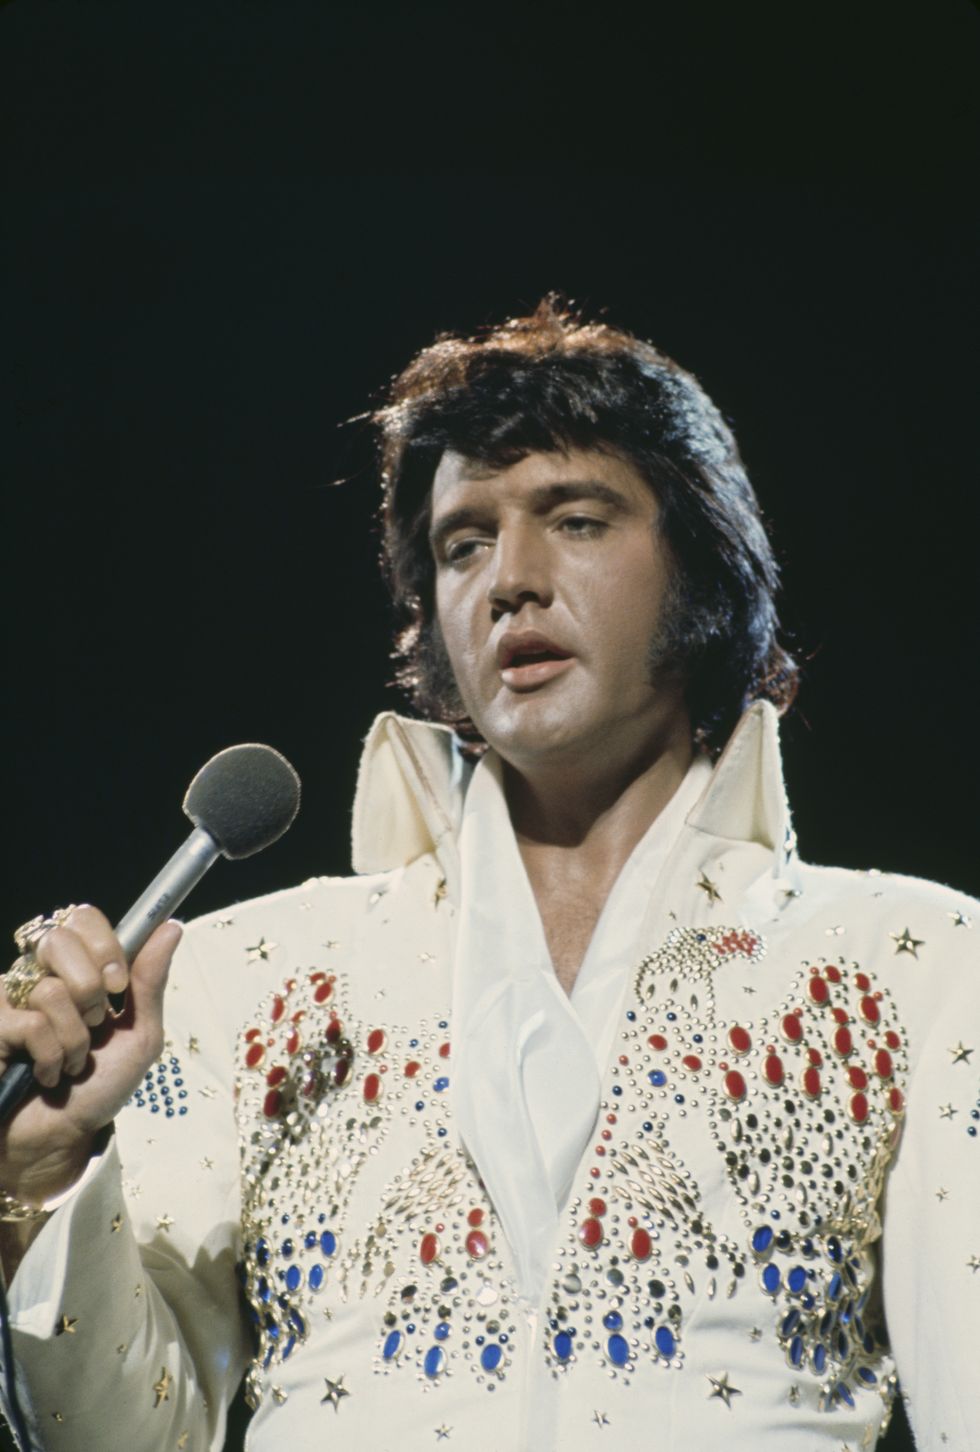 american singer elvis presley 1935   1977 performing in the aloha from hawaii via satellite, televised concert at the honolulu international center, hawaii, 14th january 1973 photo by fotos internationalarchive photosgetty images